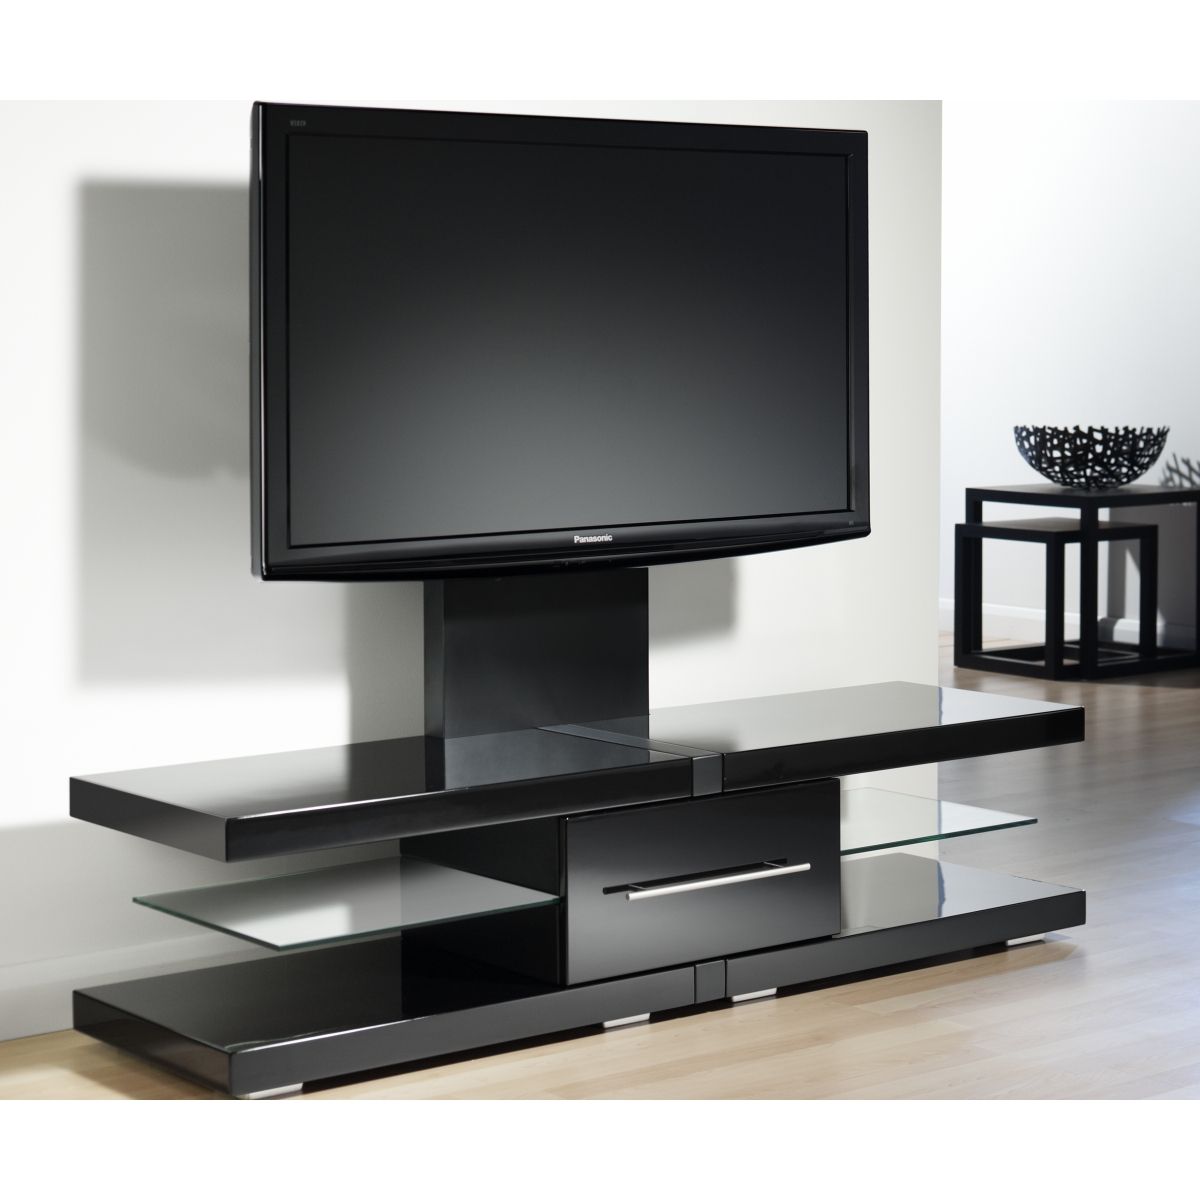 Cool Flat Screen Tv Stands With Mount – Homesfeed In Wall Mounted Tv Stand With Shelves (View 4 of 15)